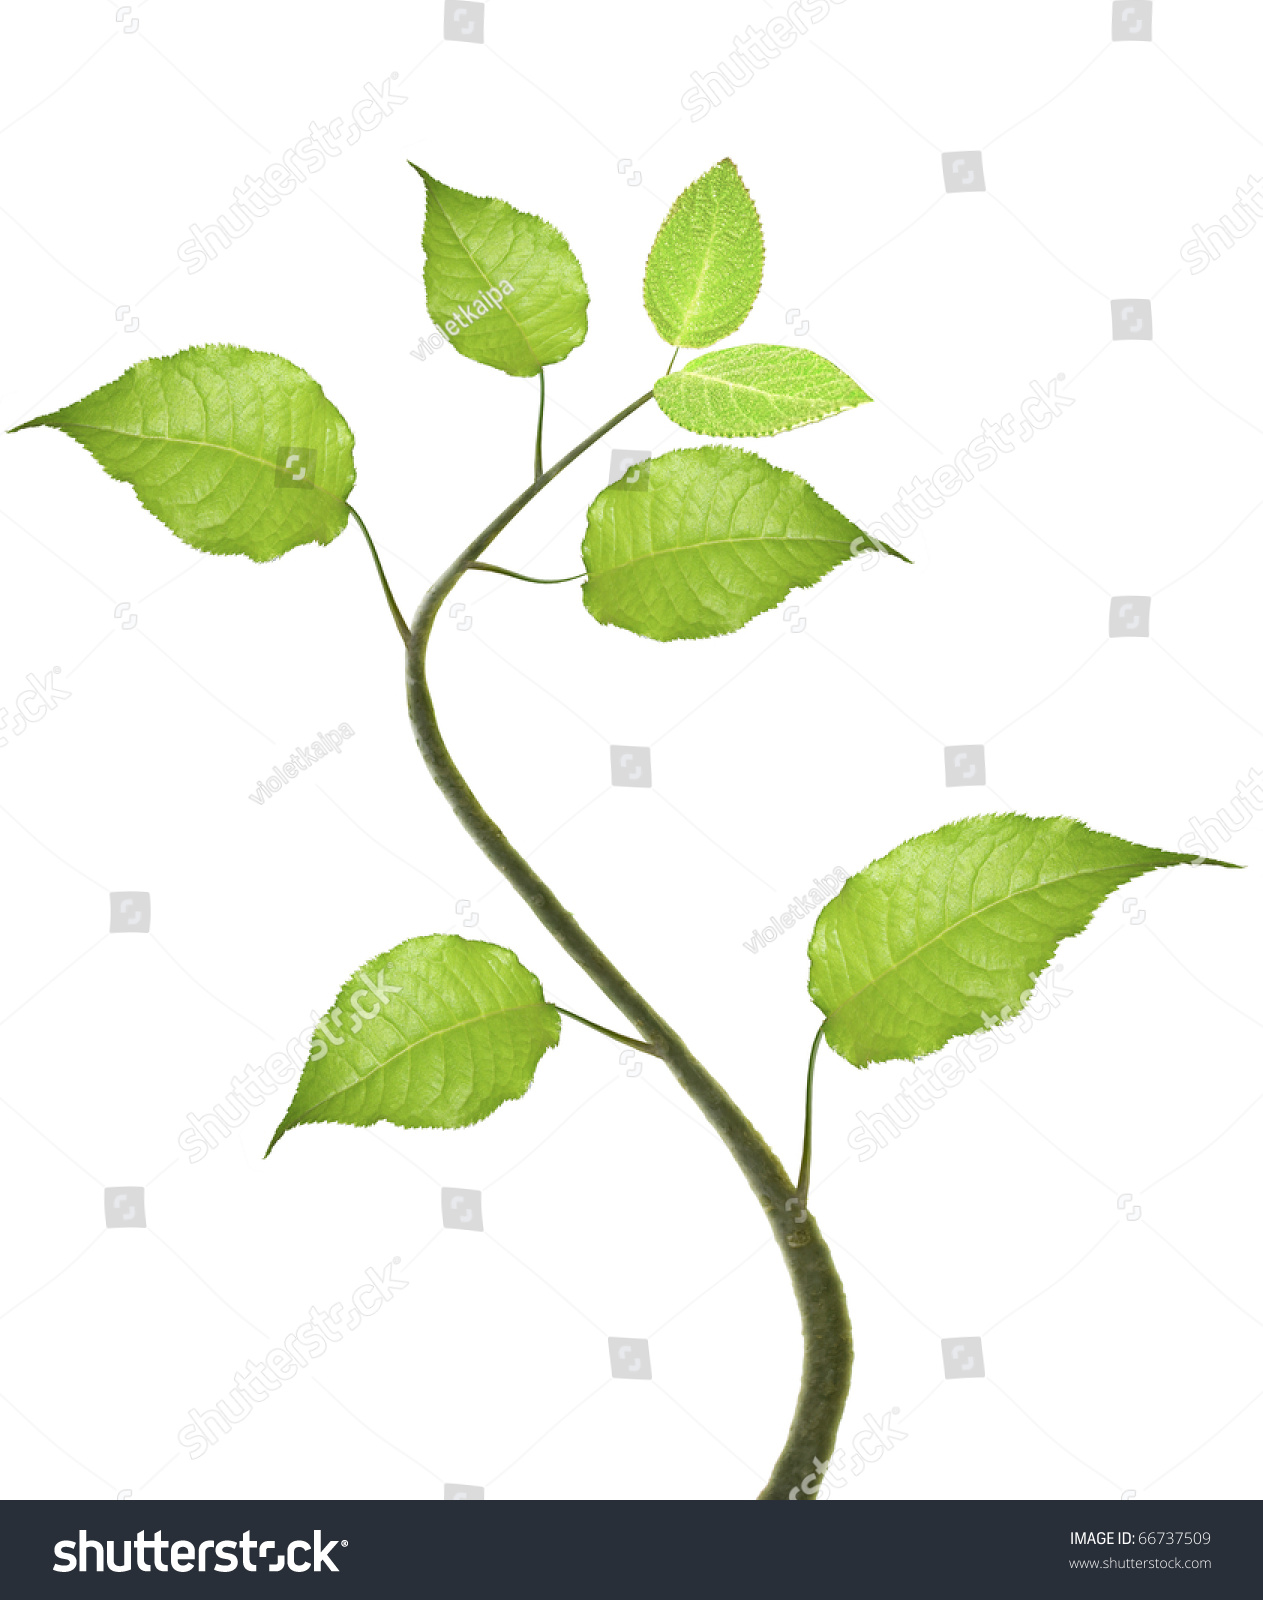 Green leaves on white background #66737509